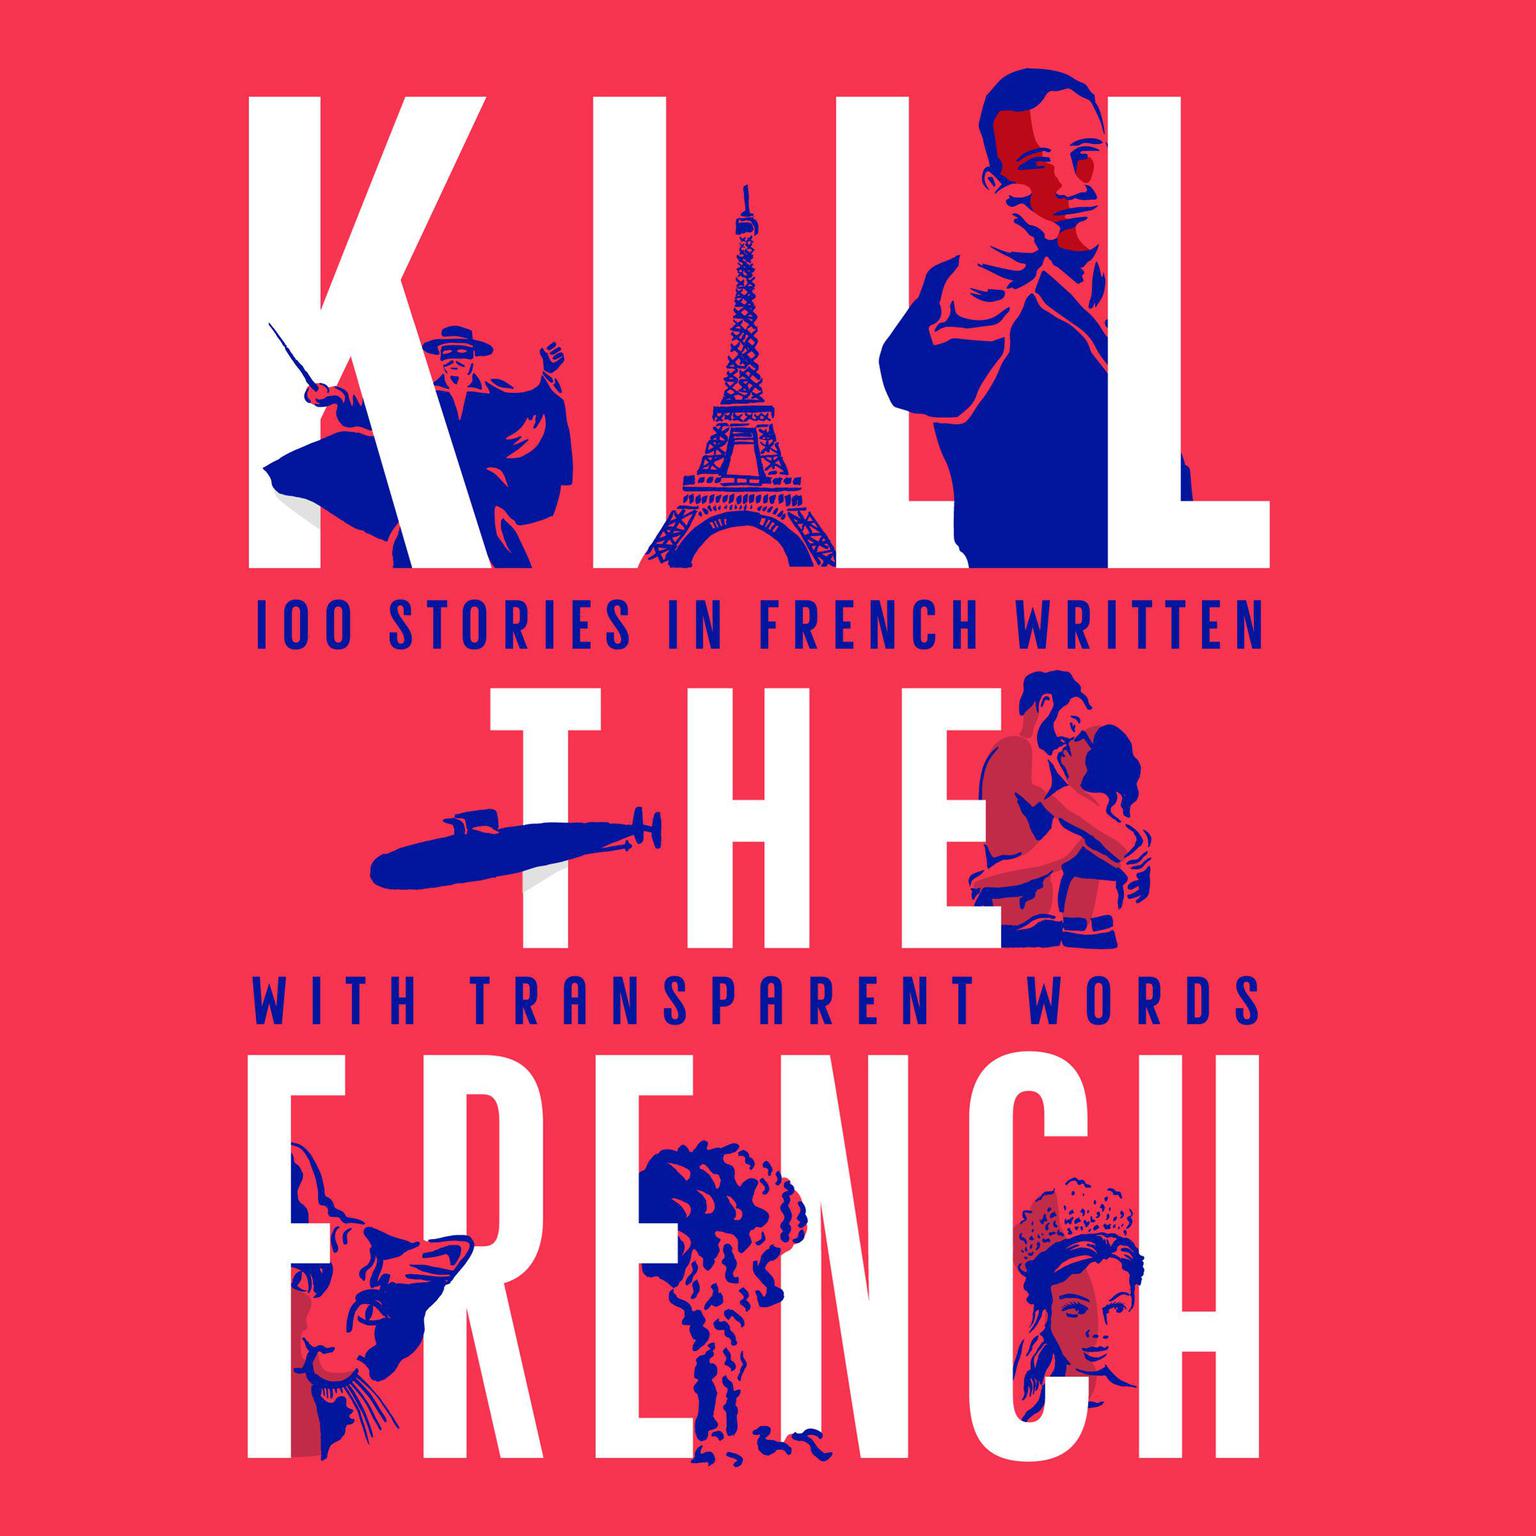 Kill The French Audiobook, by Vincent Serrano Guerra